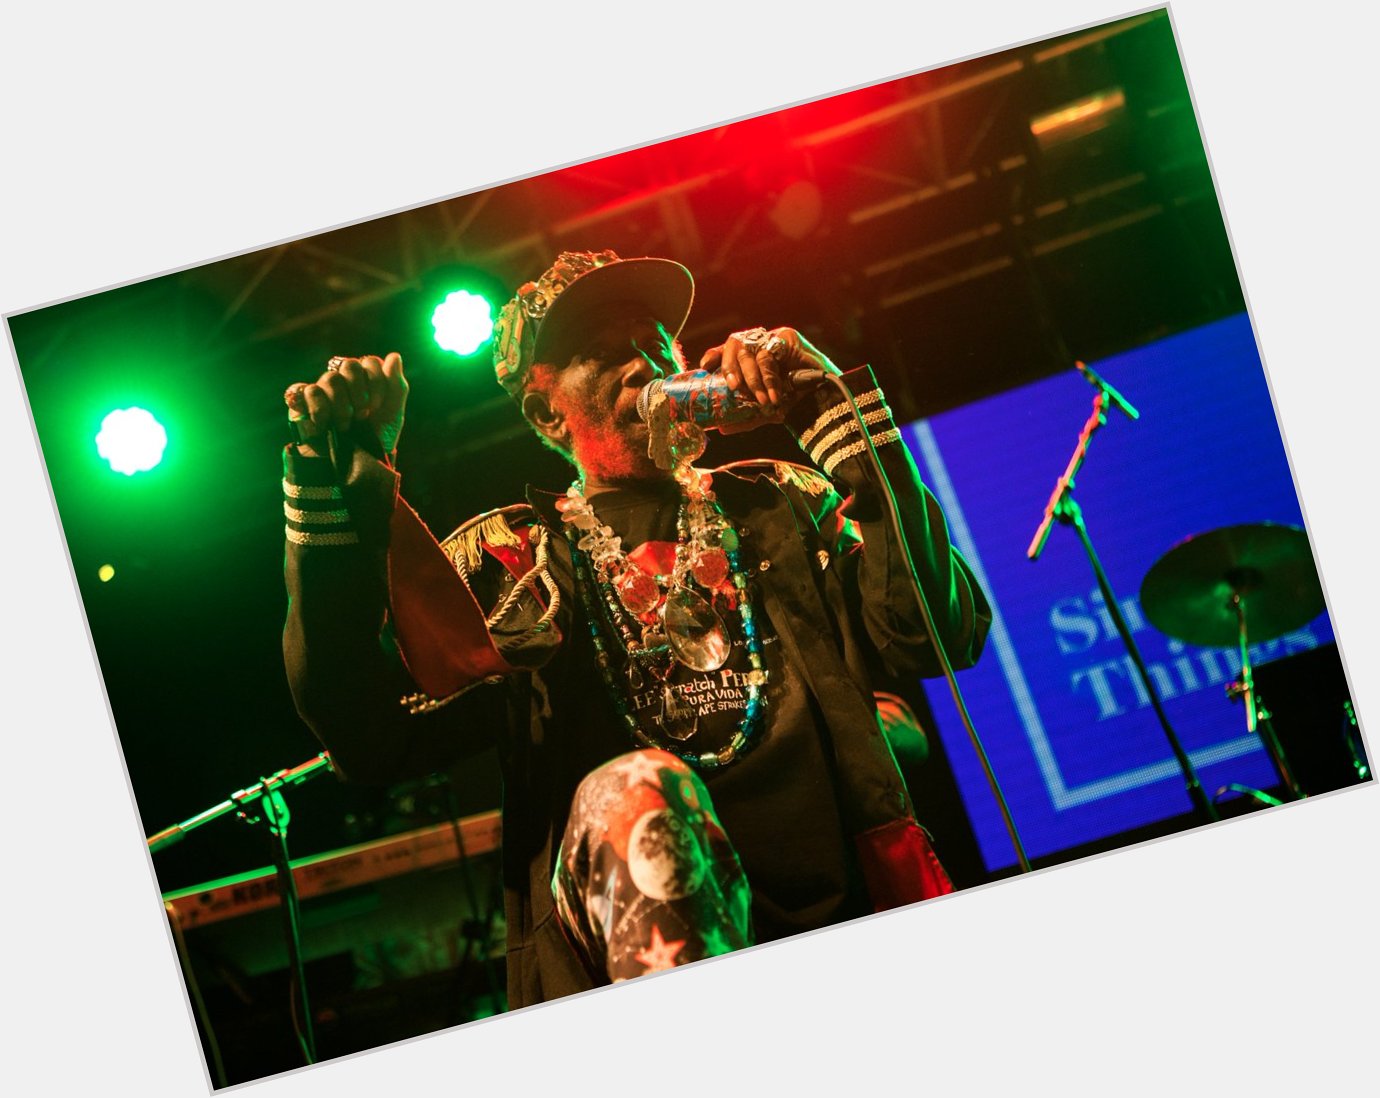 Lee Scratch Perry turns 81 this week. Happy birthday at one of our favourite recent guests. 